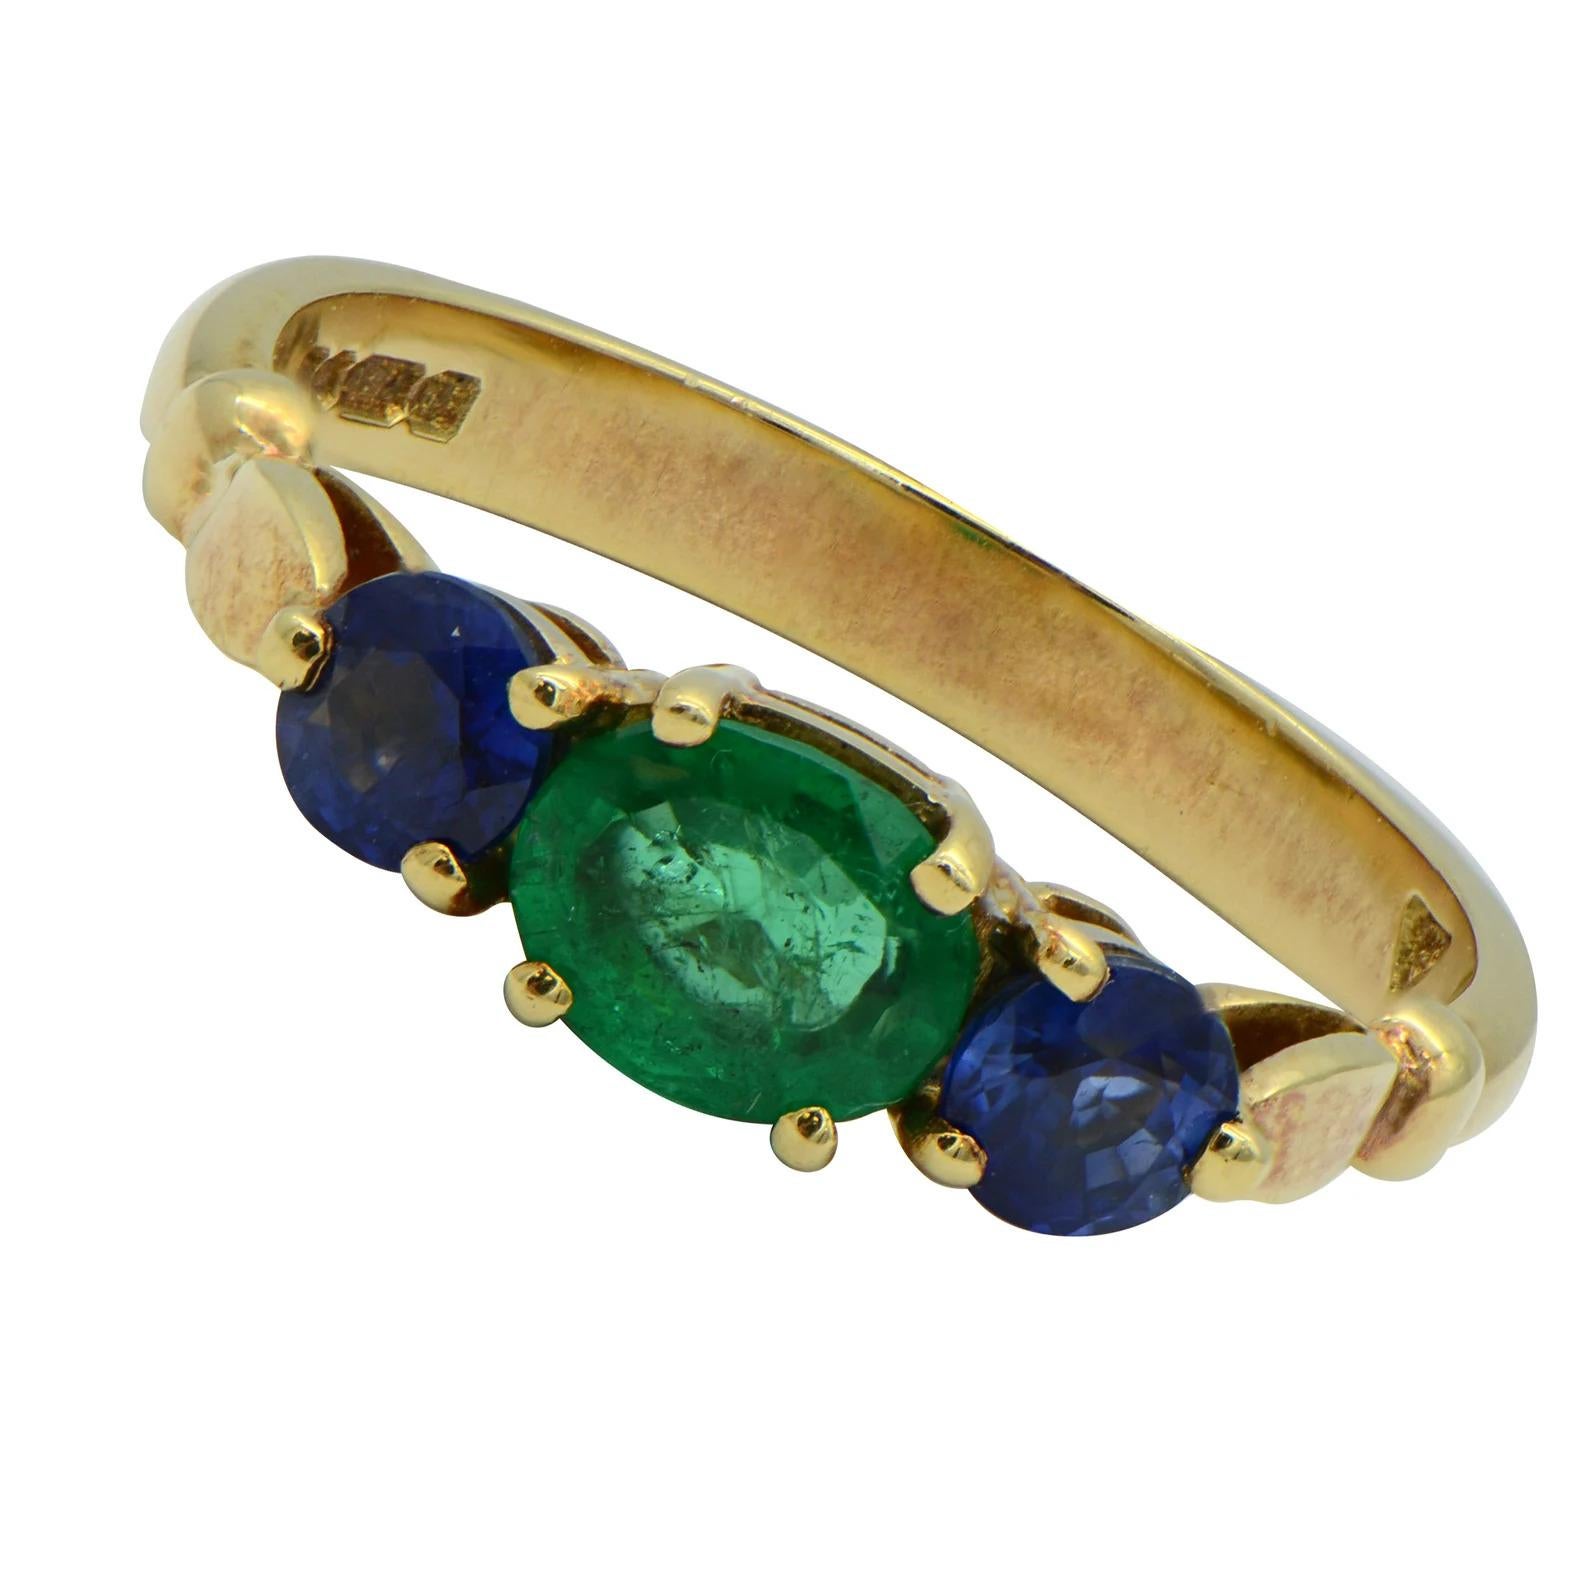 Vintage Three Stone Emerald and Sapphire Engagement Ring 18K Yellow Gold

This three stone ring is a truly splendid example of vintage jewelry. Featuring an elegant green emerald nestled between two round blue sapphires, this ring has a very unique